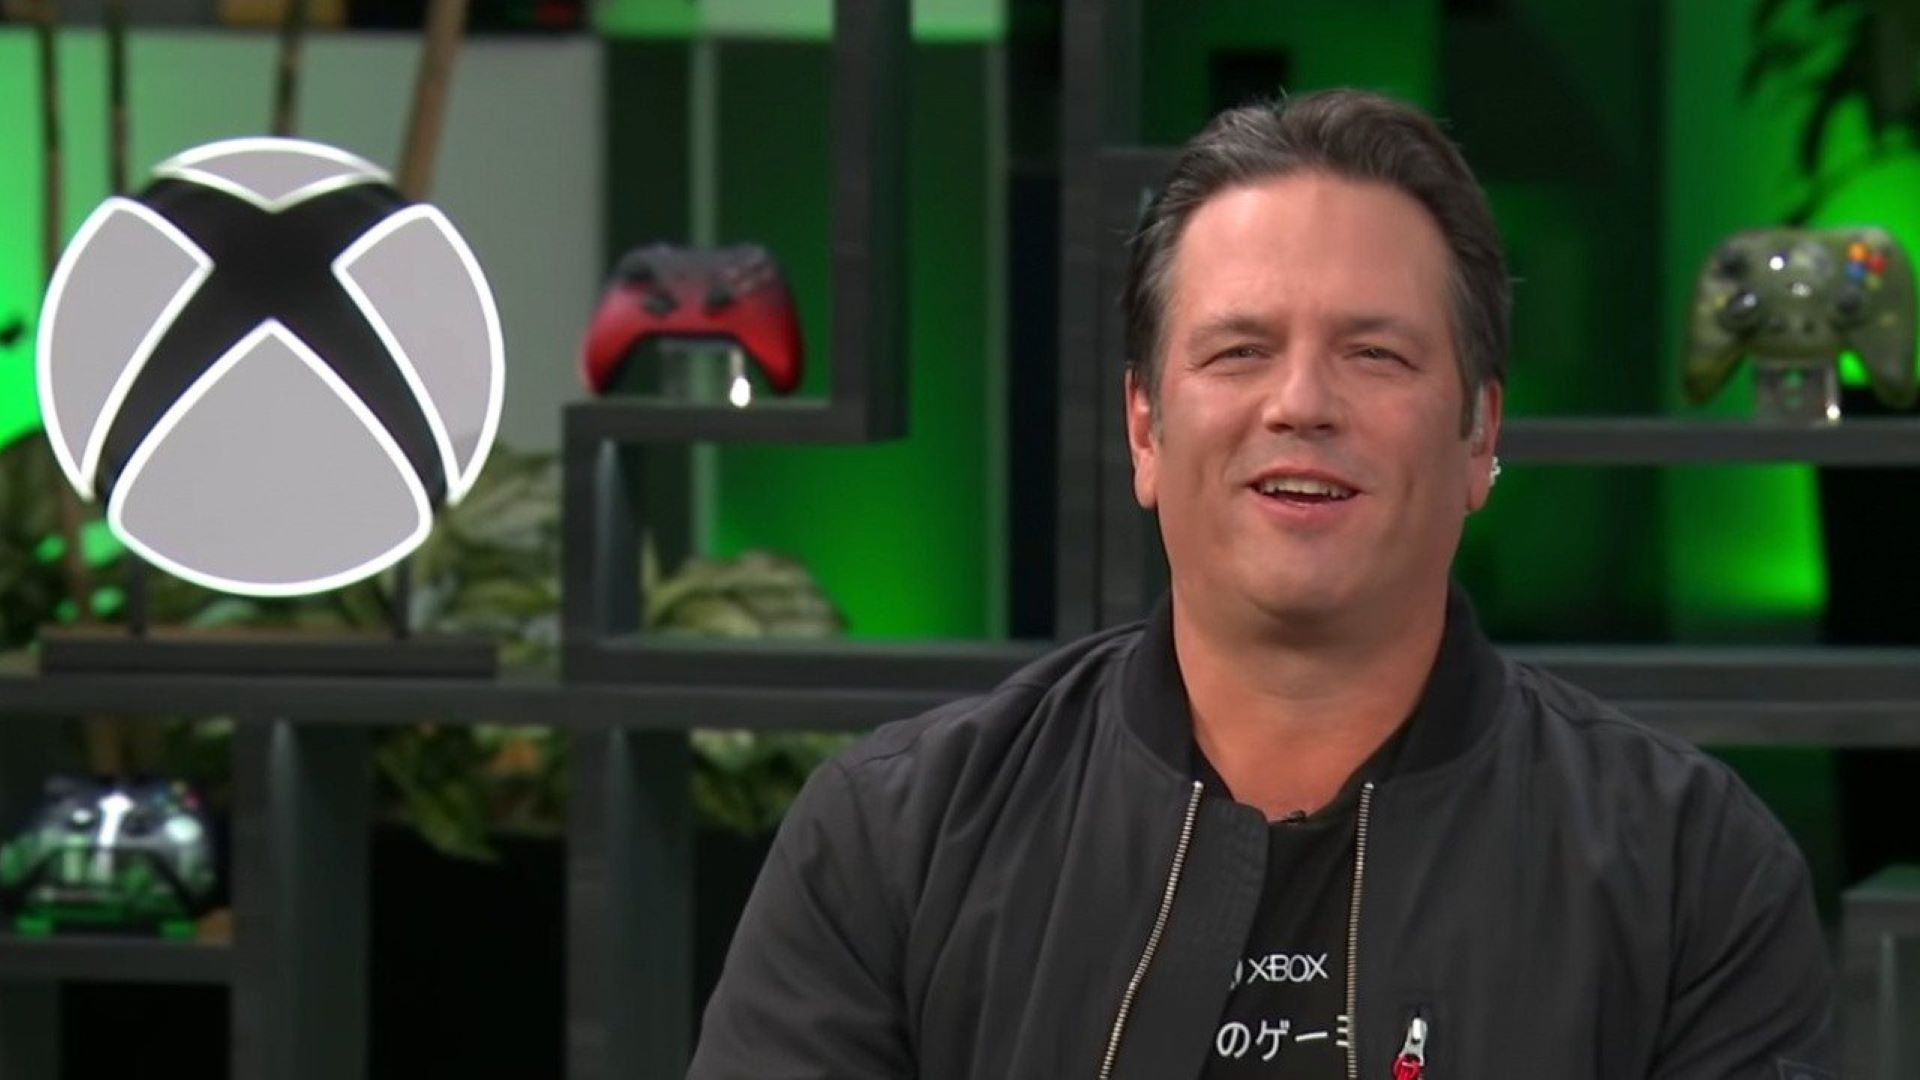 Phil Spencer Talks Starfield, ABK Deal, Xbox Series S  Baldur's Gate 3  Confirmed For Xbox in 2023 